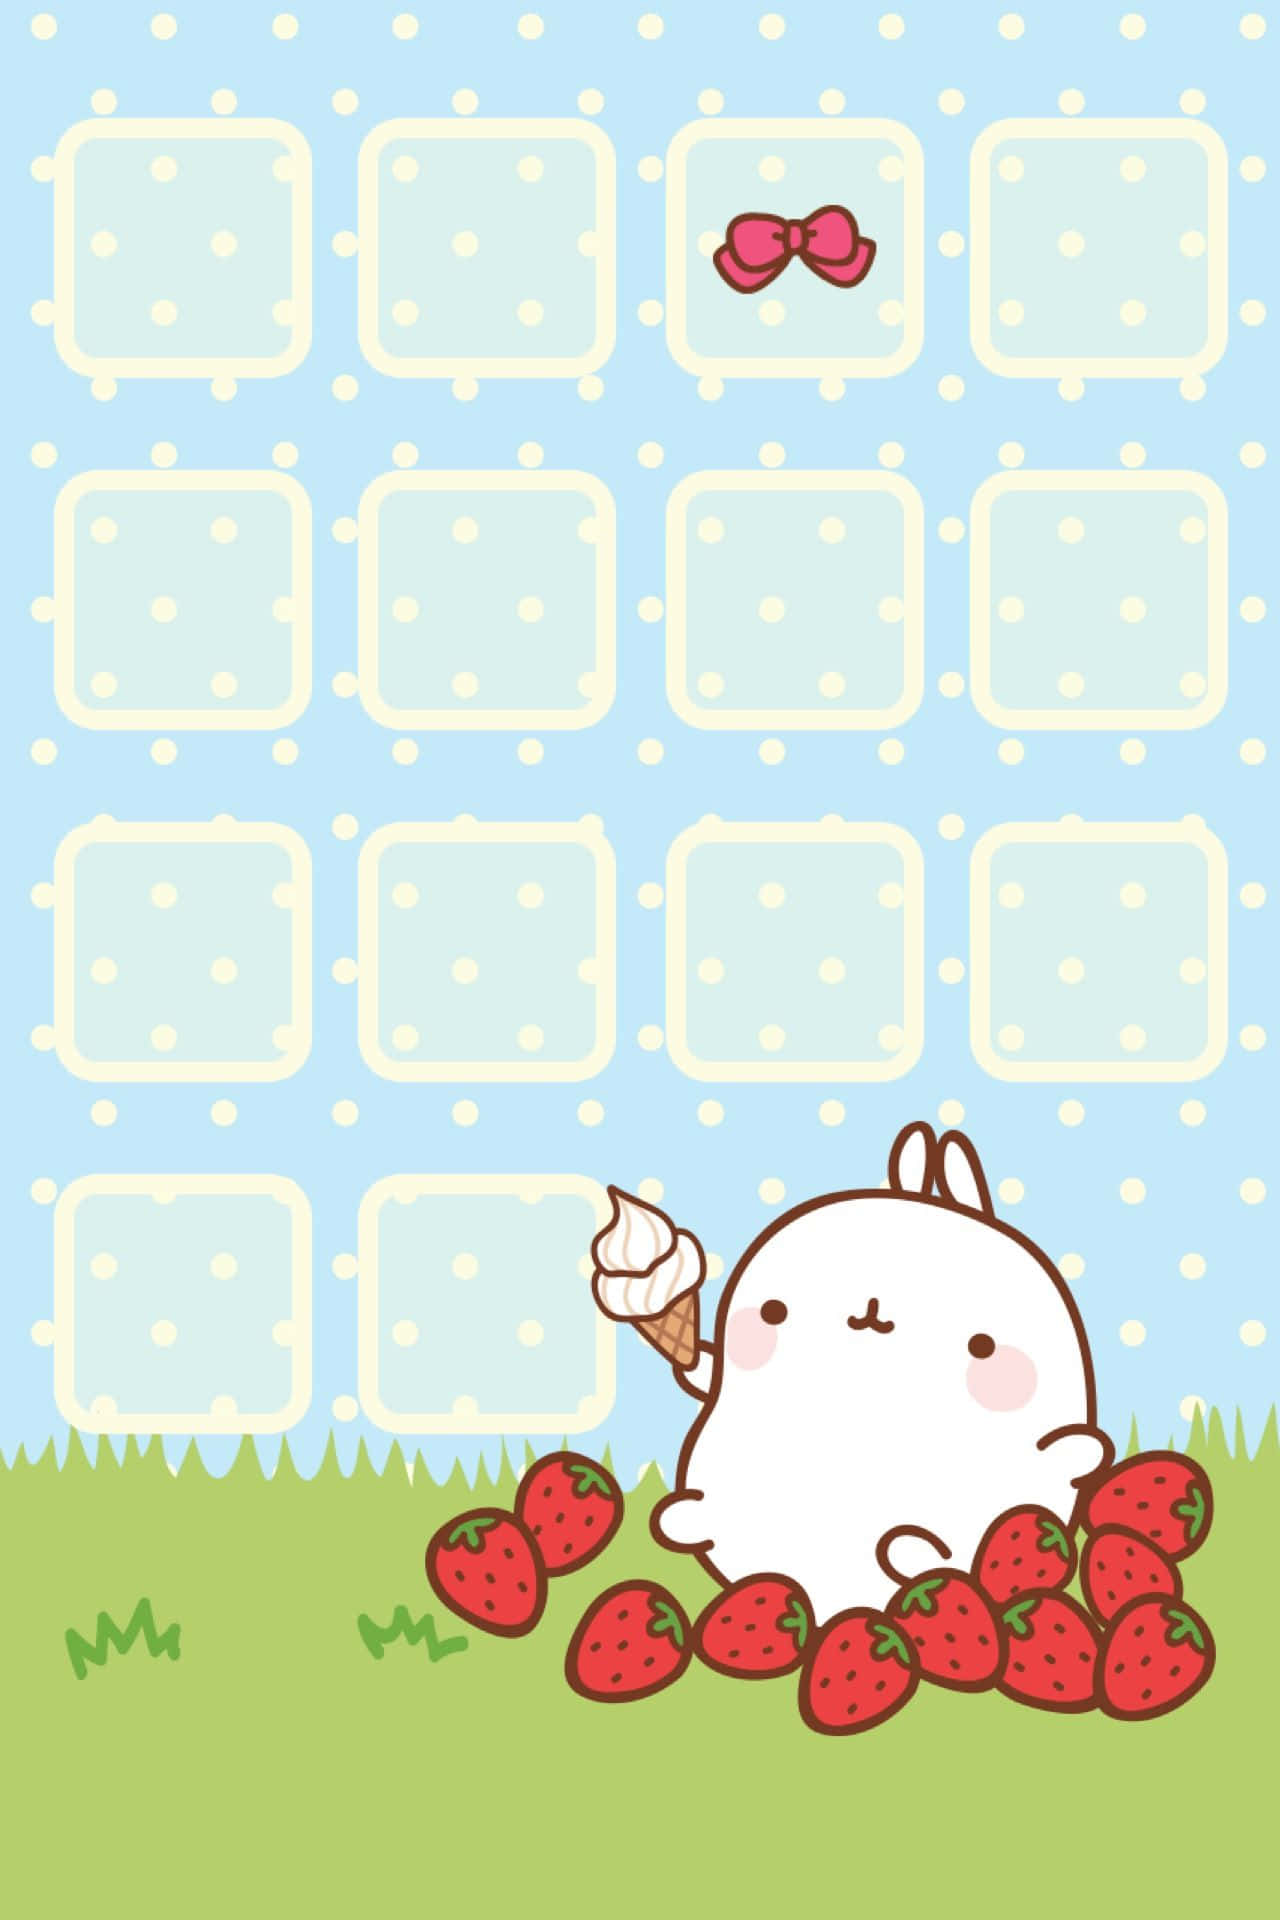 Take Notes in Style with this Cute Kawaii iPad Wallpaper